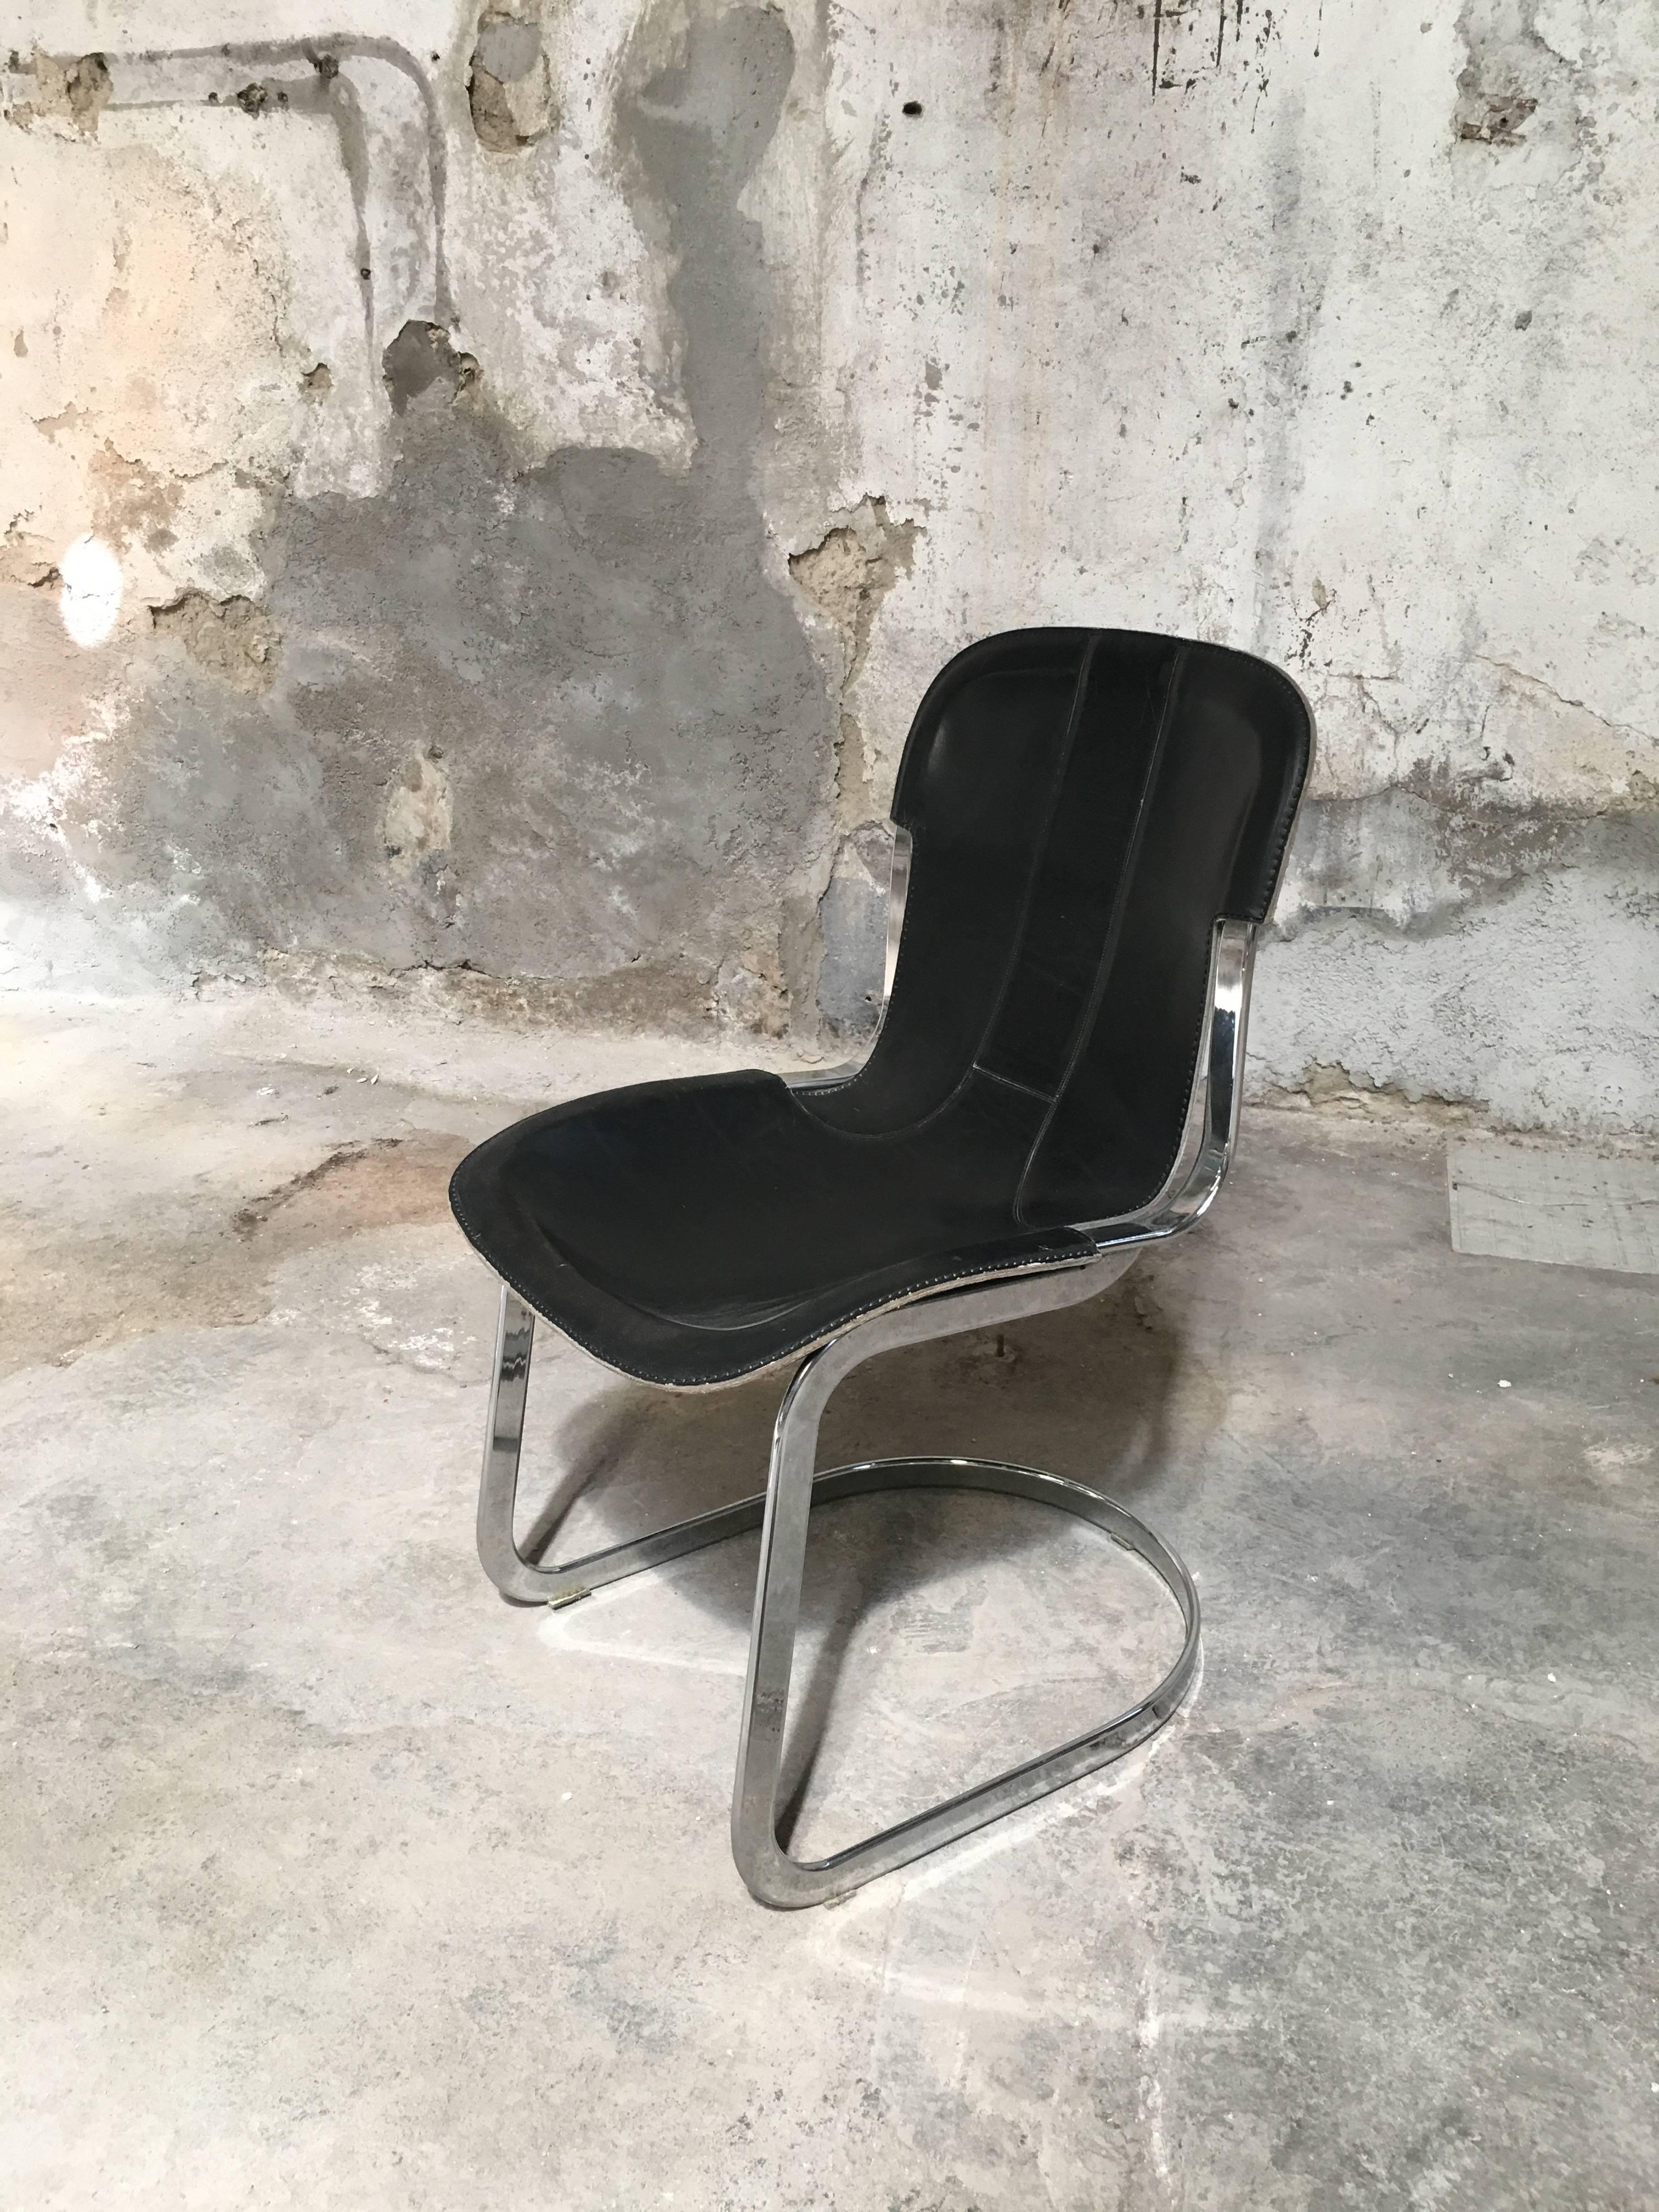 Steel Four Italian Chairs with Original Black Leather Seat by Willy Rizzo for Cidue